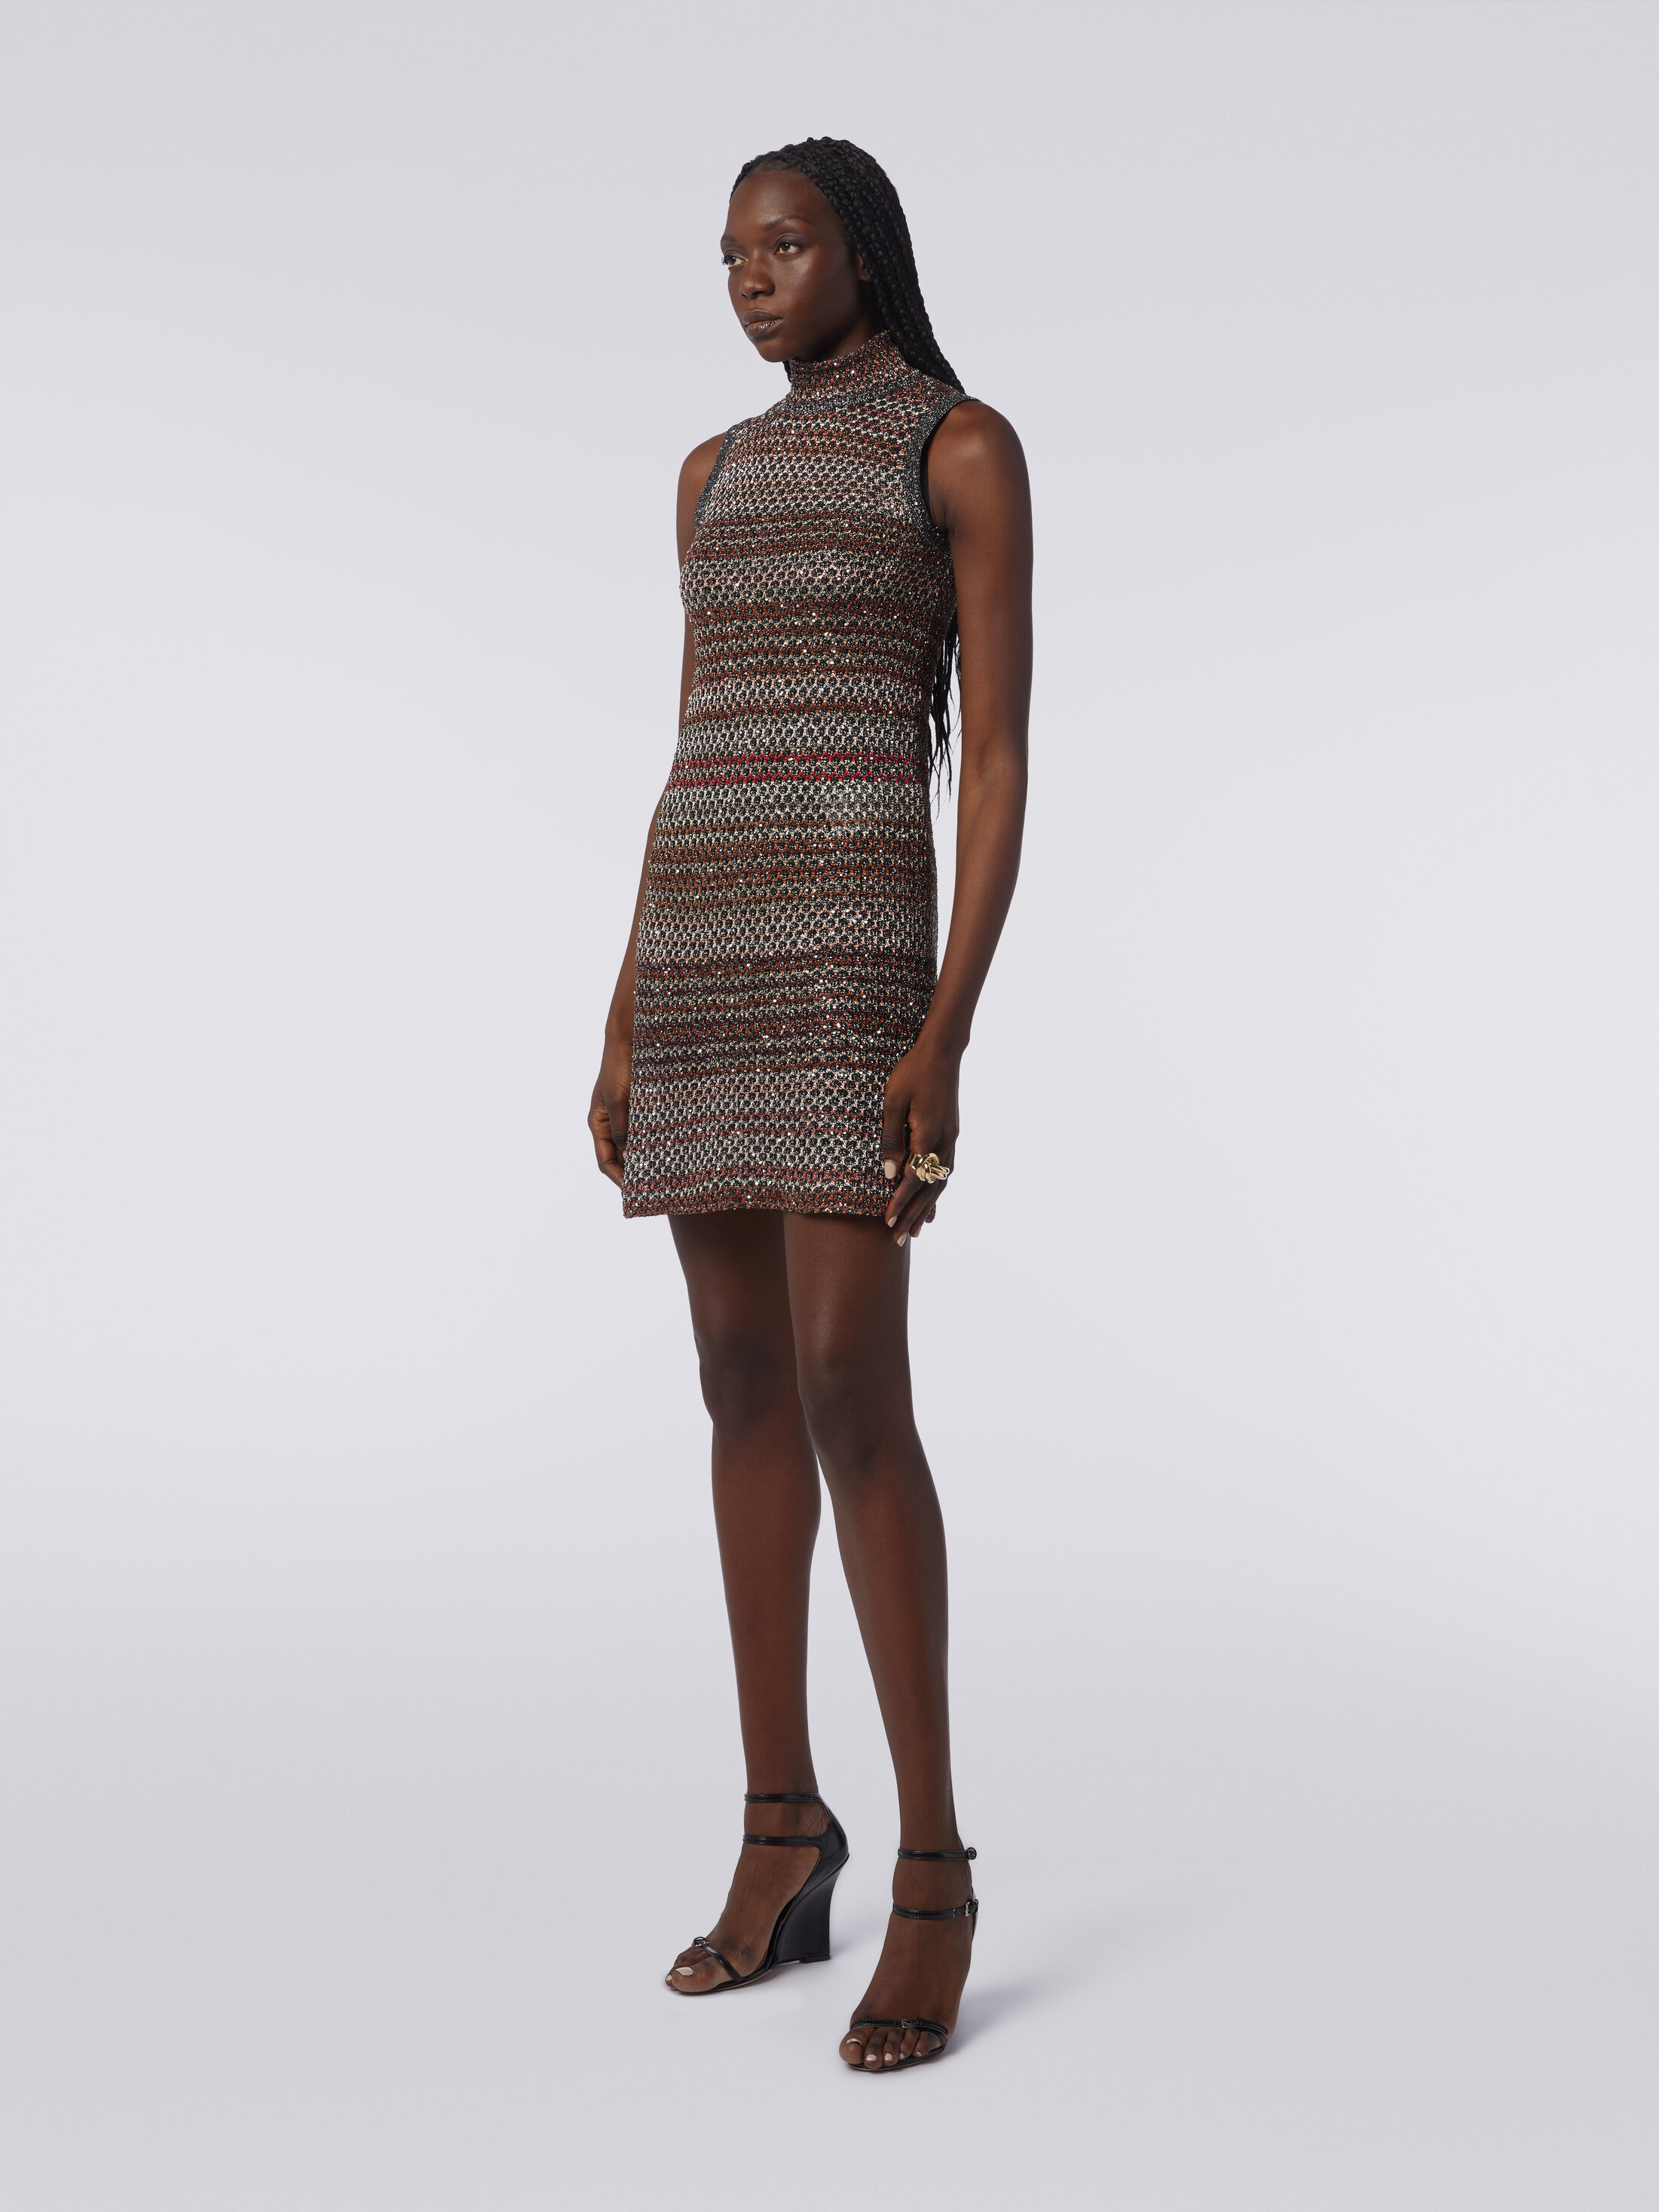 Minidress in mesh knit with high neck and sequin appliqué